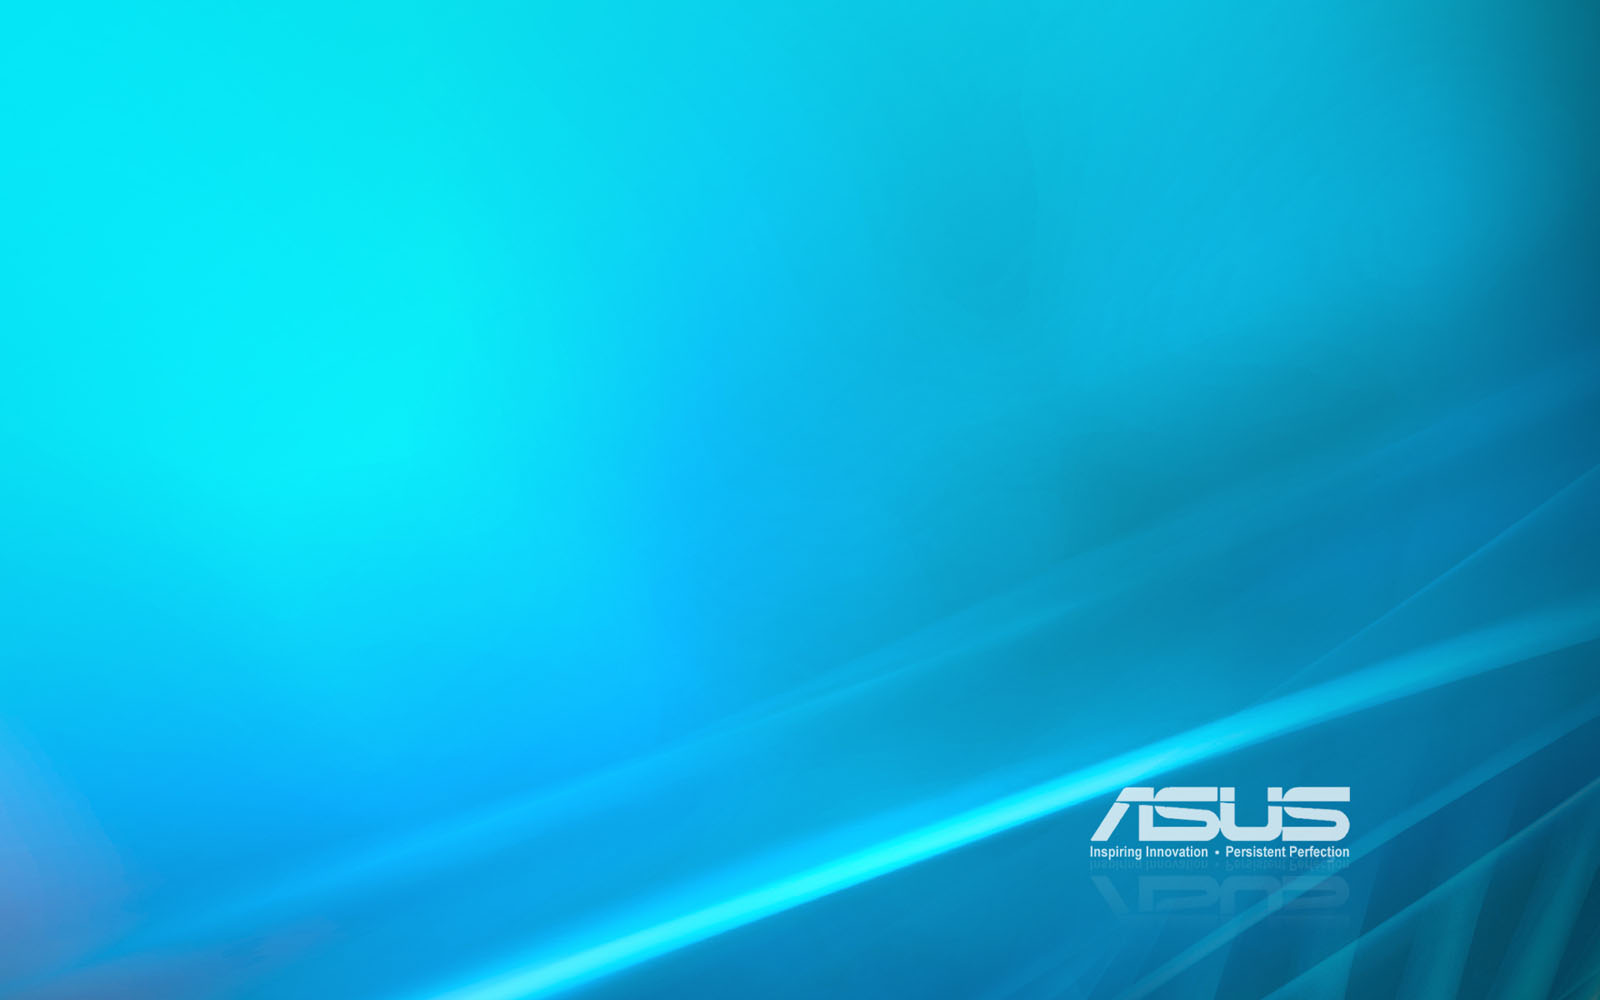  asus wallpapers asus desktop wallpapers asus desktop backgrounds asus